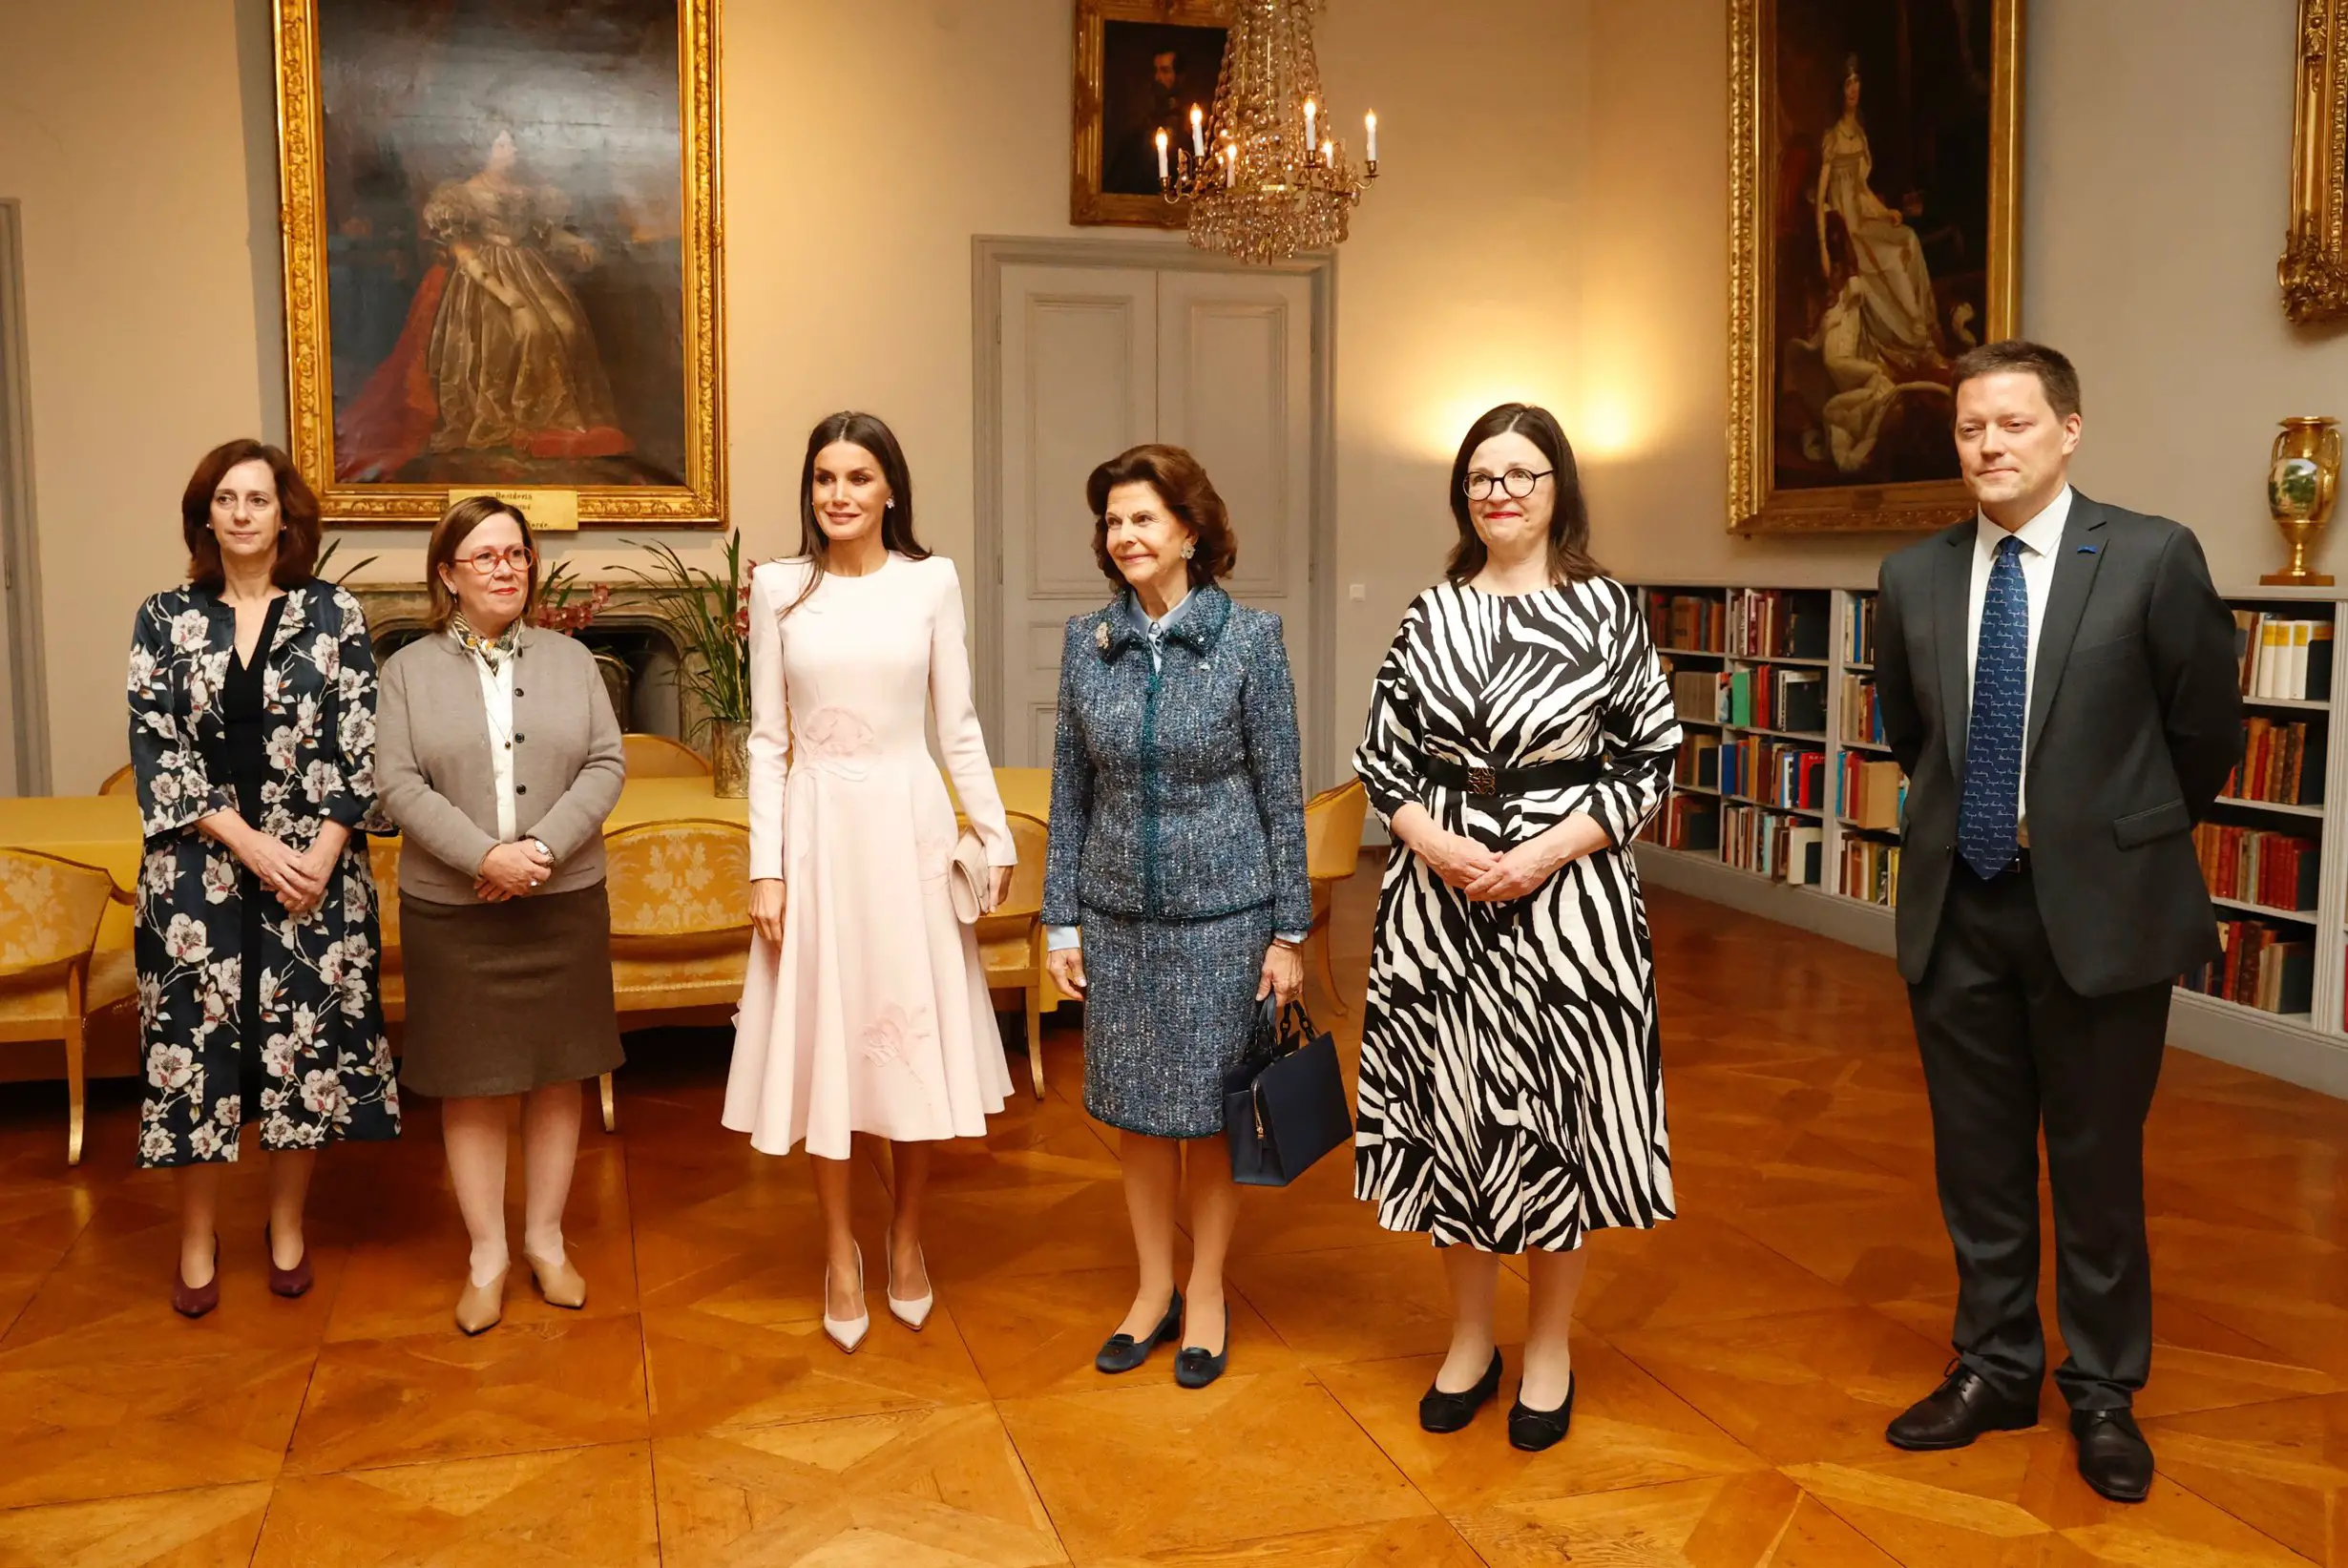 Letizia joined Queen Silvia of Sweden for a visit to Bernadotte Library at the Royal Palace in Stockholm